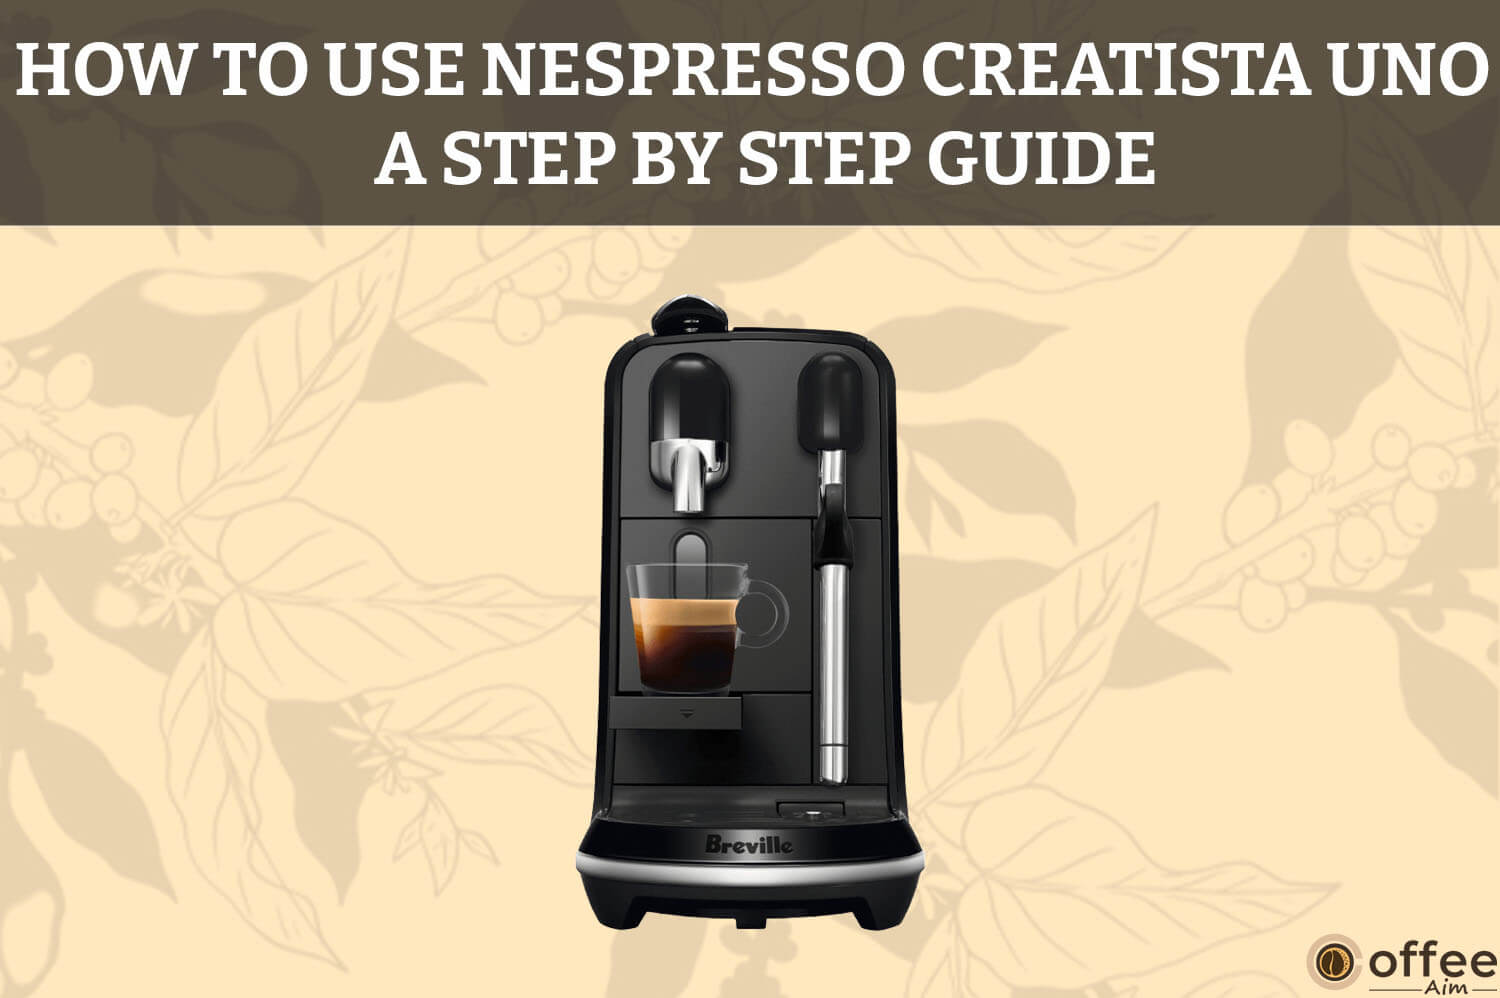 How-to-Use-Nespresso-Creatista-Uno-A-Step-by-Step-Guide